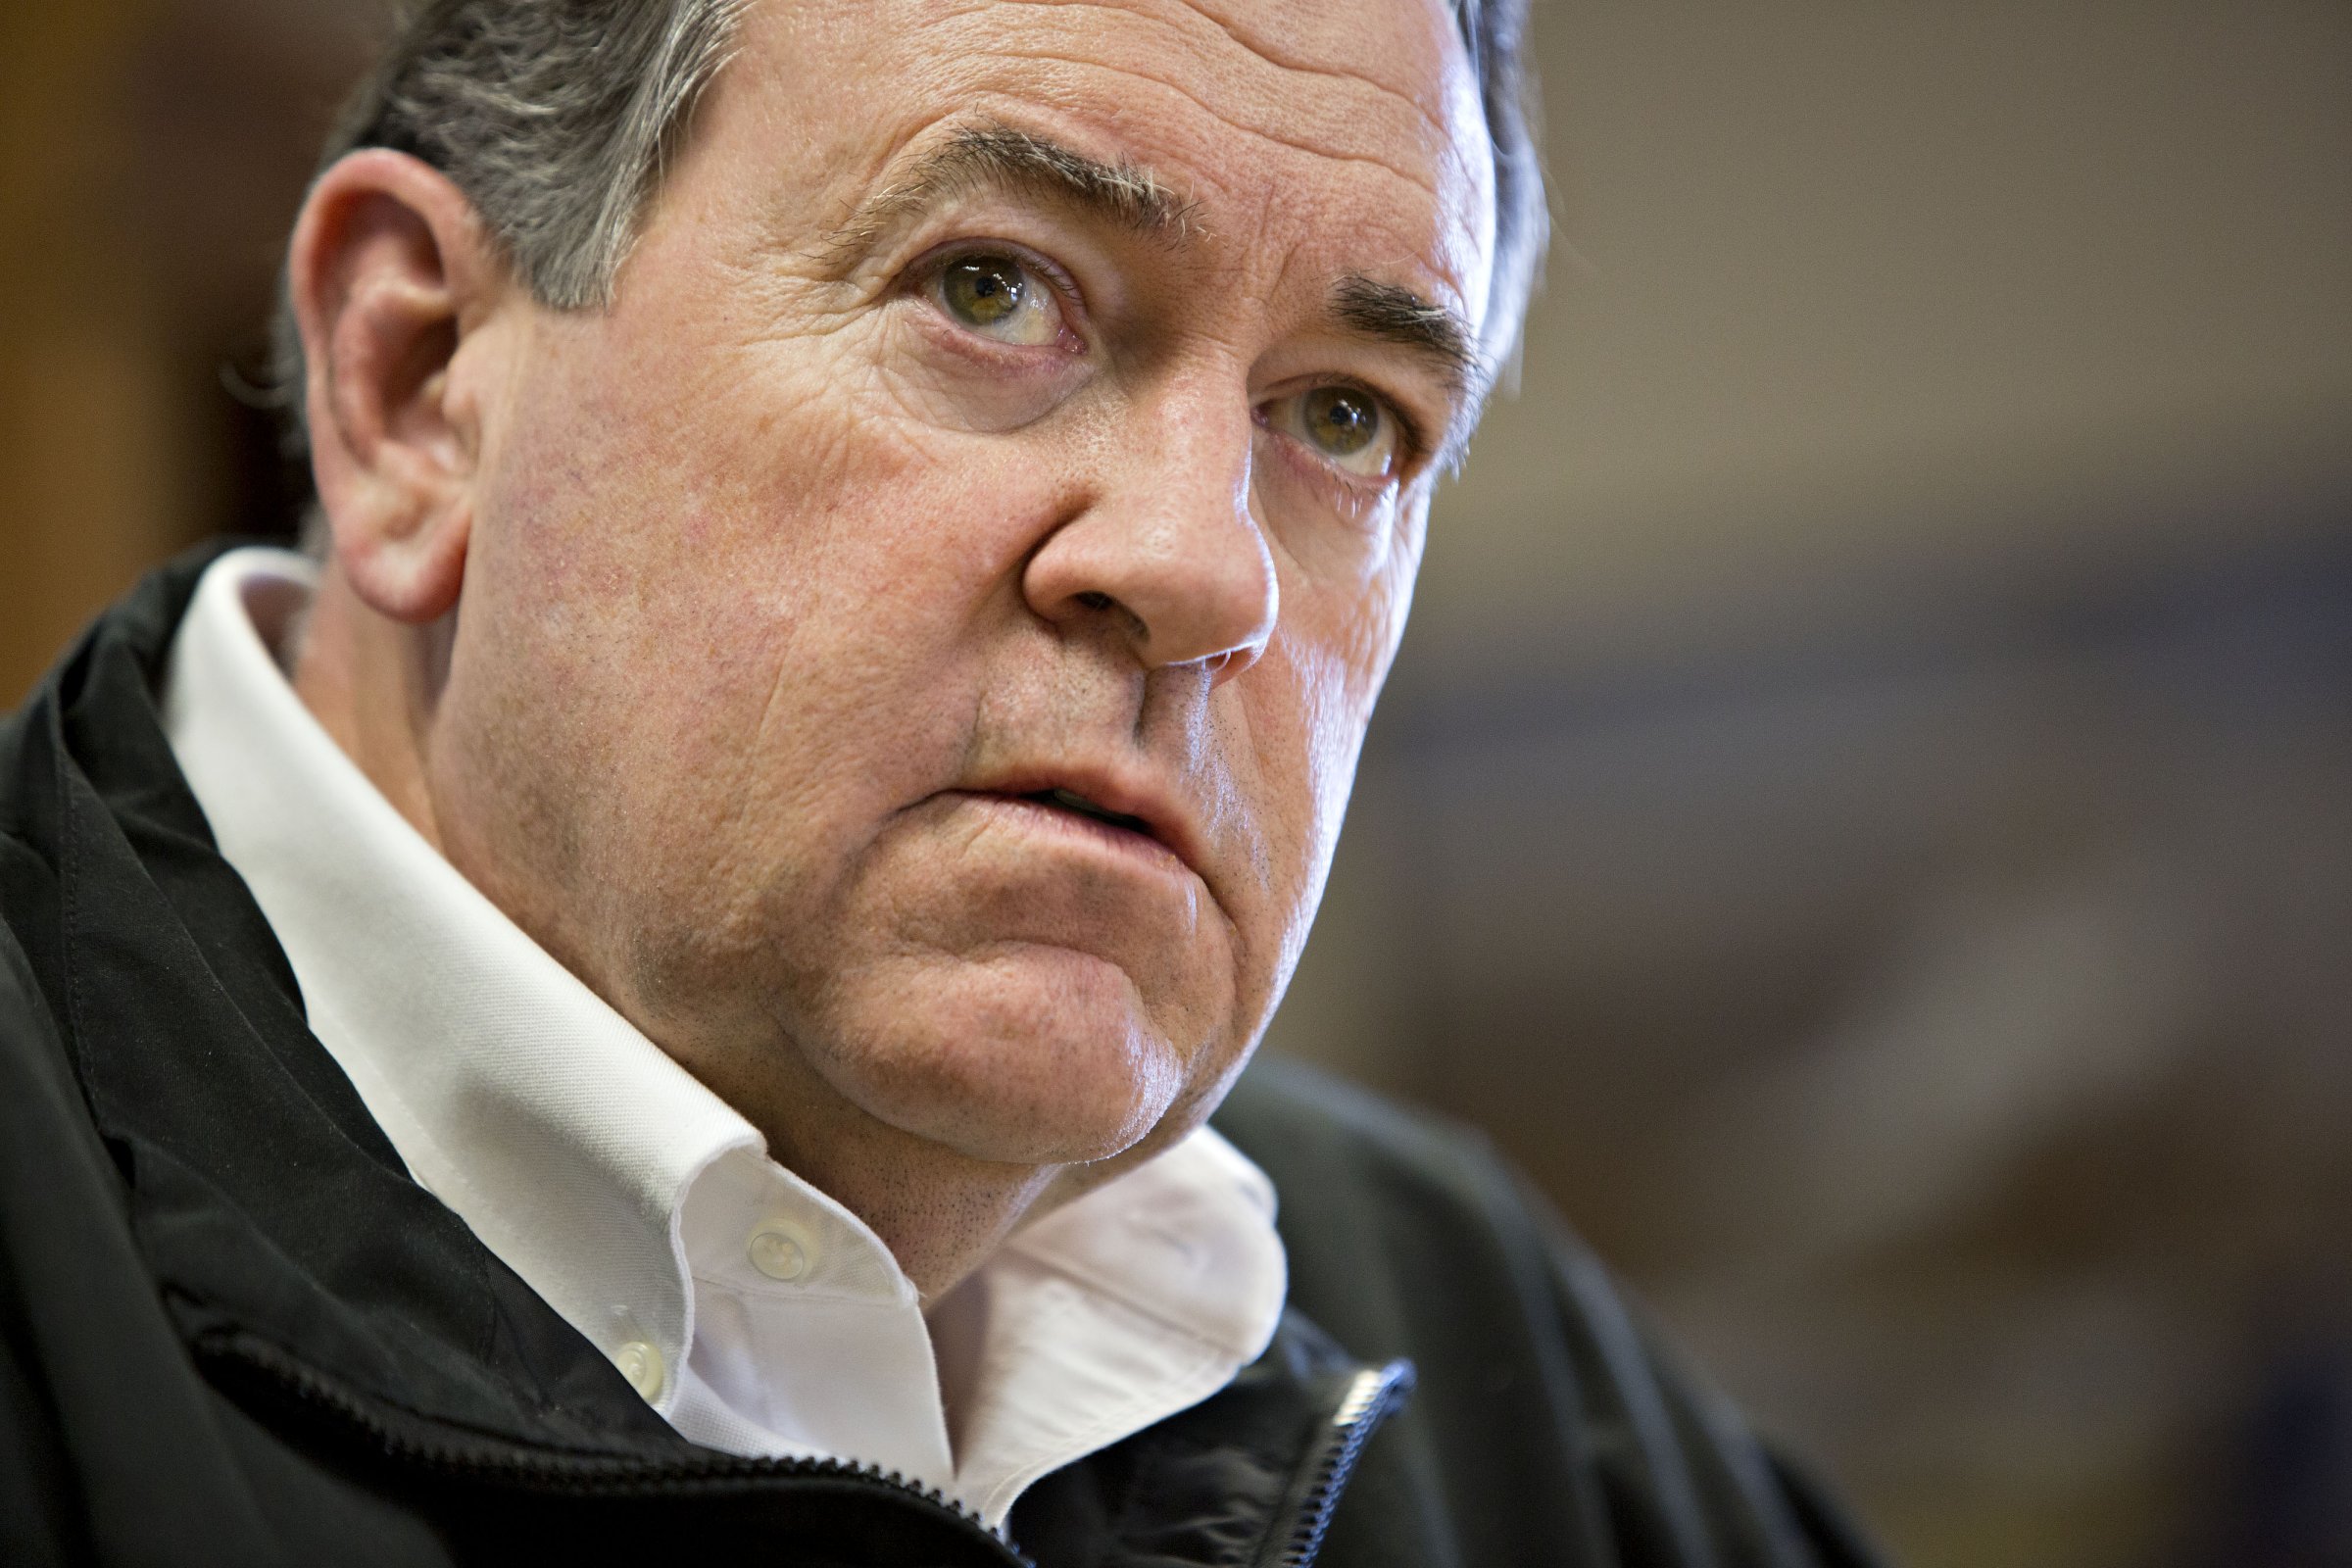 Presidential Candidate Mike Huckabee Iowa Town Hall Meeting